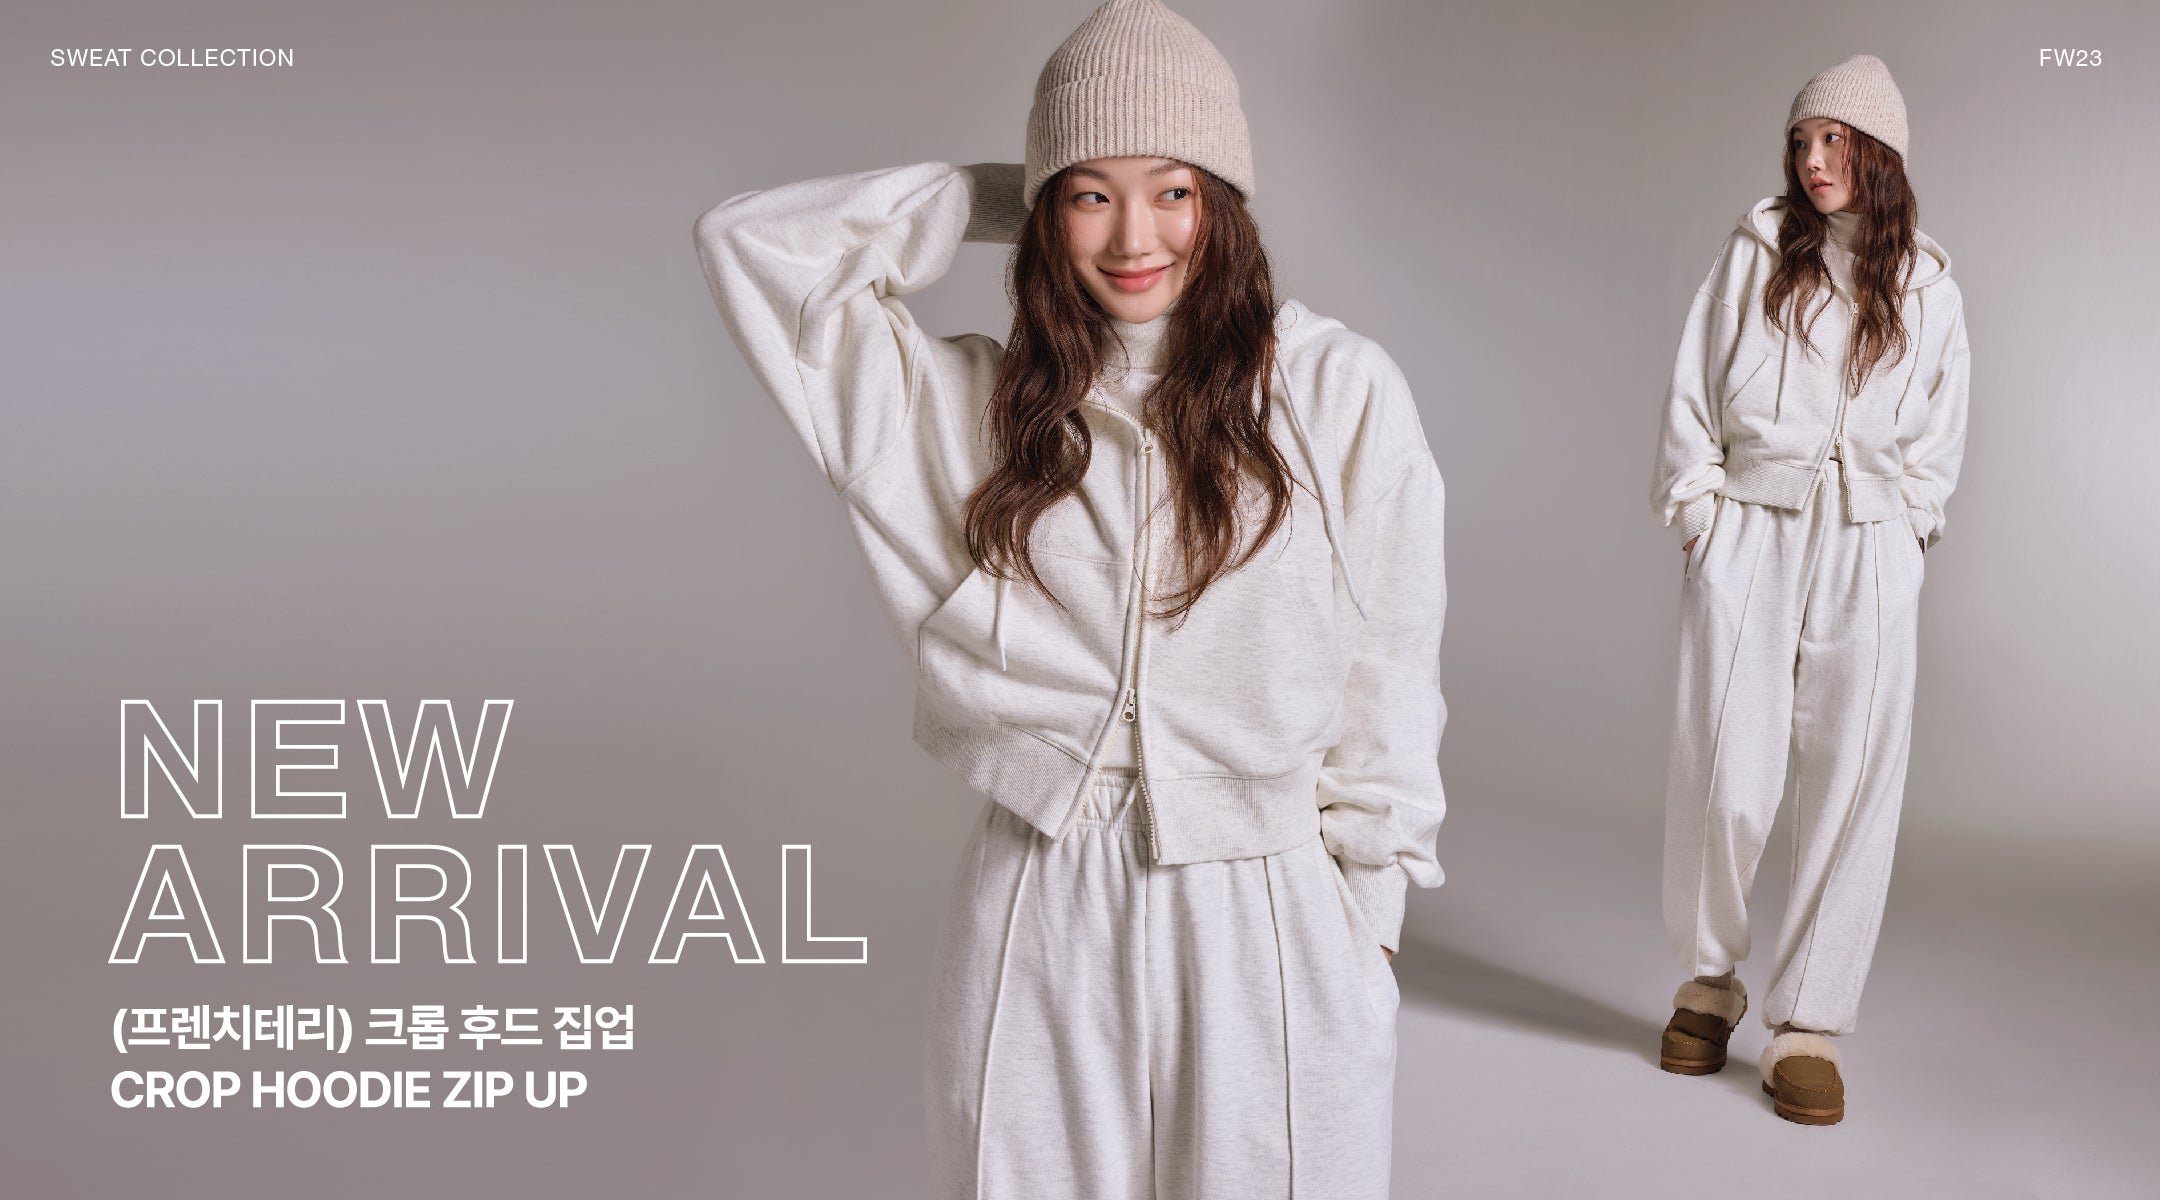 SPAO's Women Collection